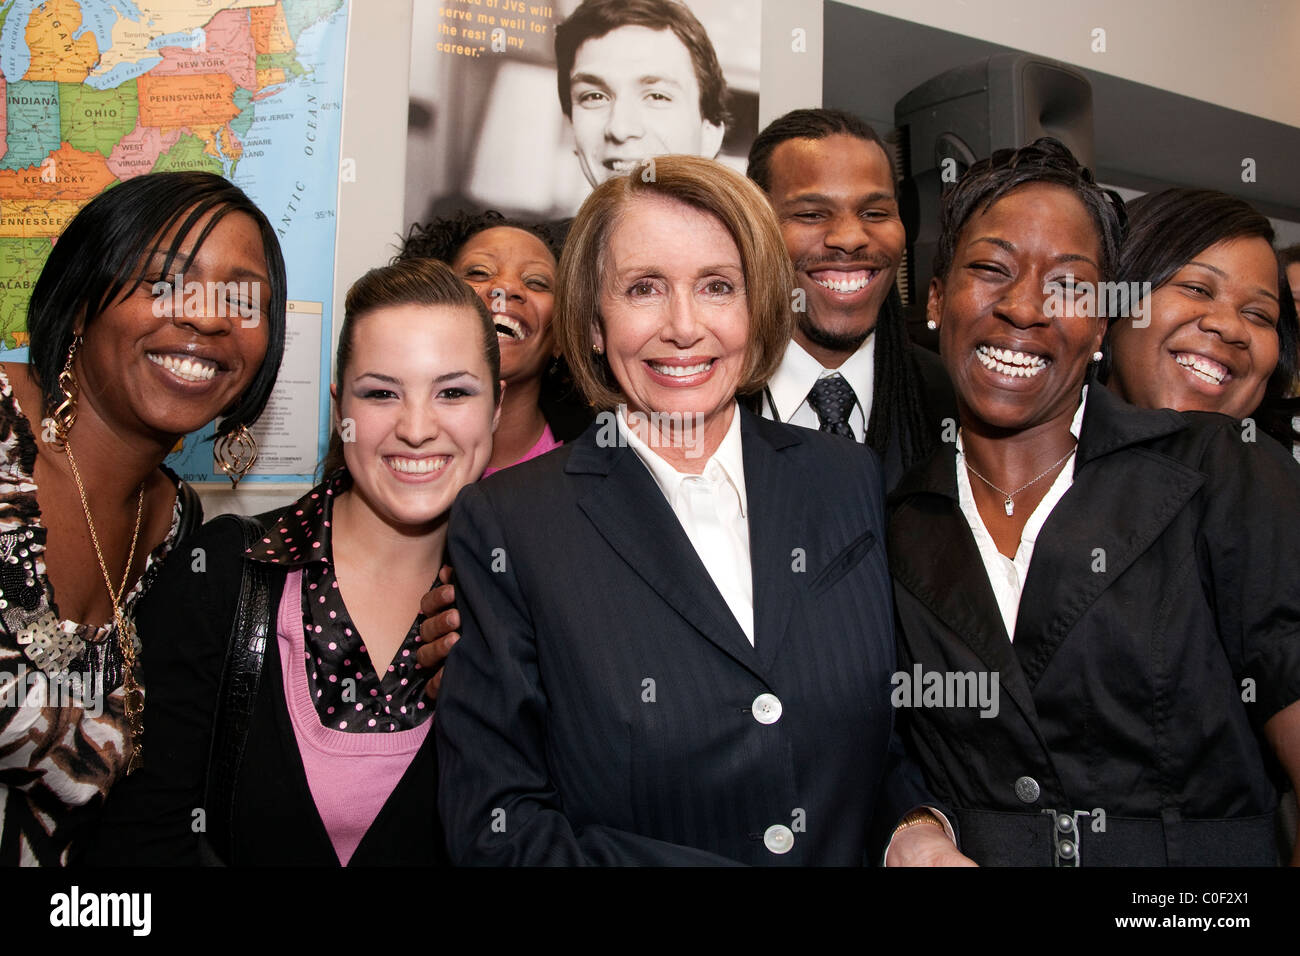 Nancy Pelosi visits with job training participants at JVS (Jewish Vocational Services) in San Francisco, CA.  June 2010 Stock Photo